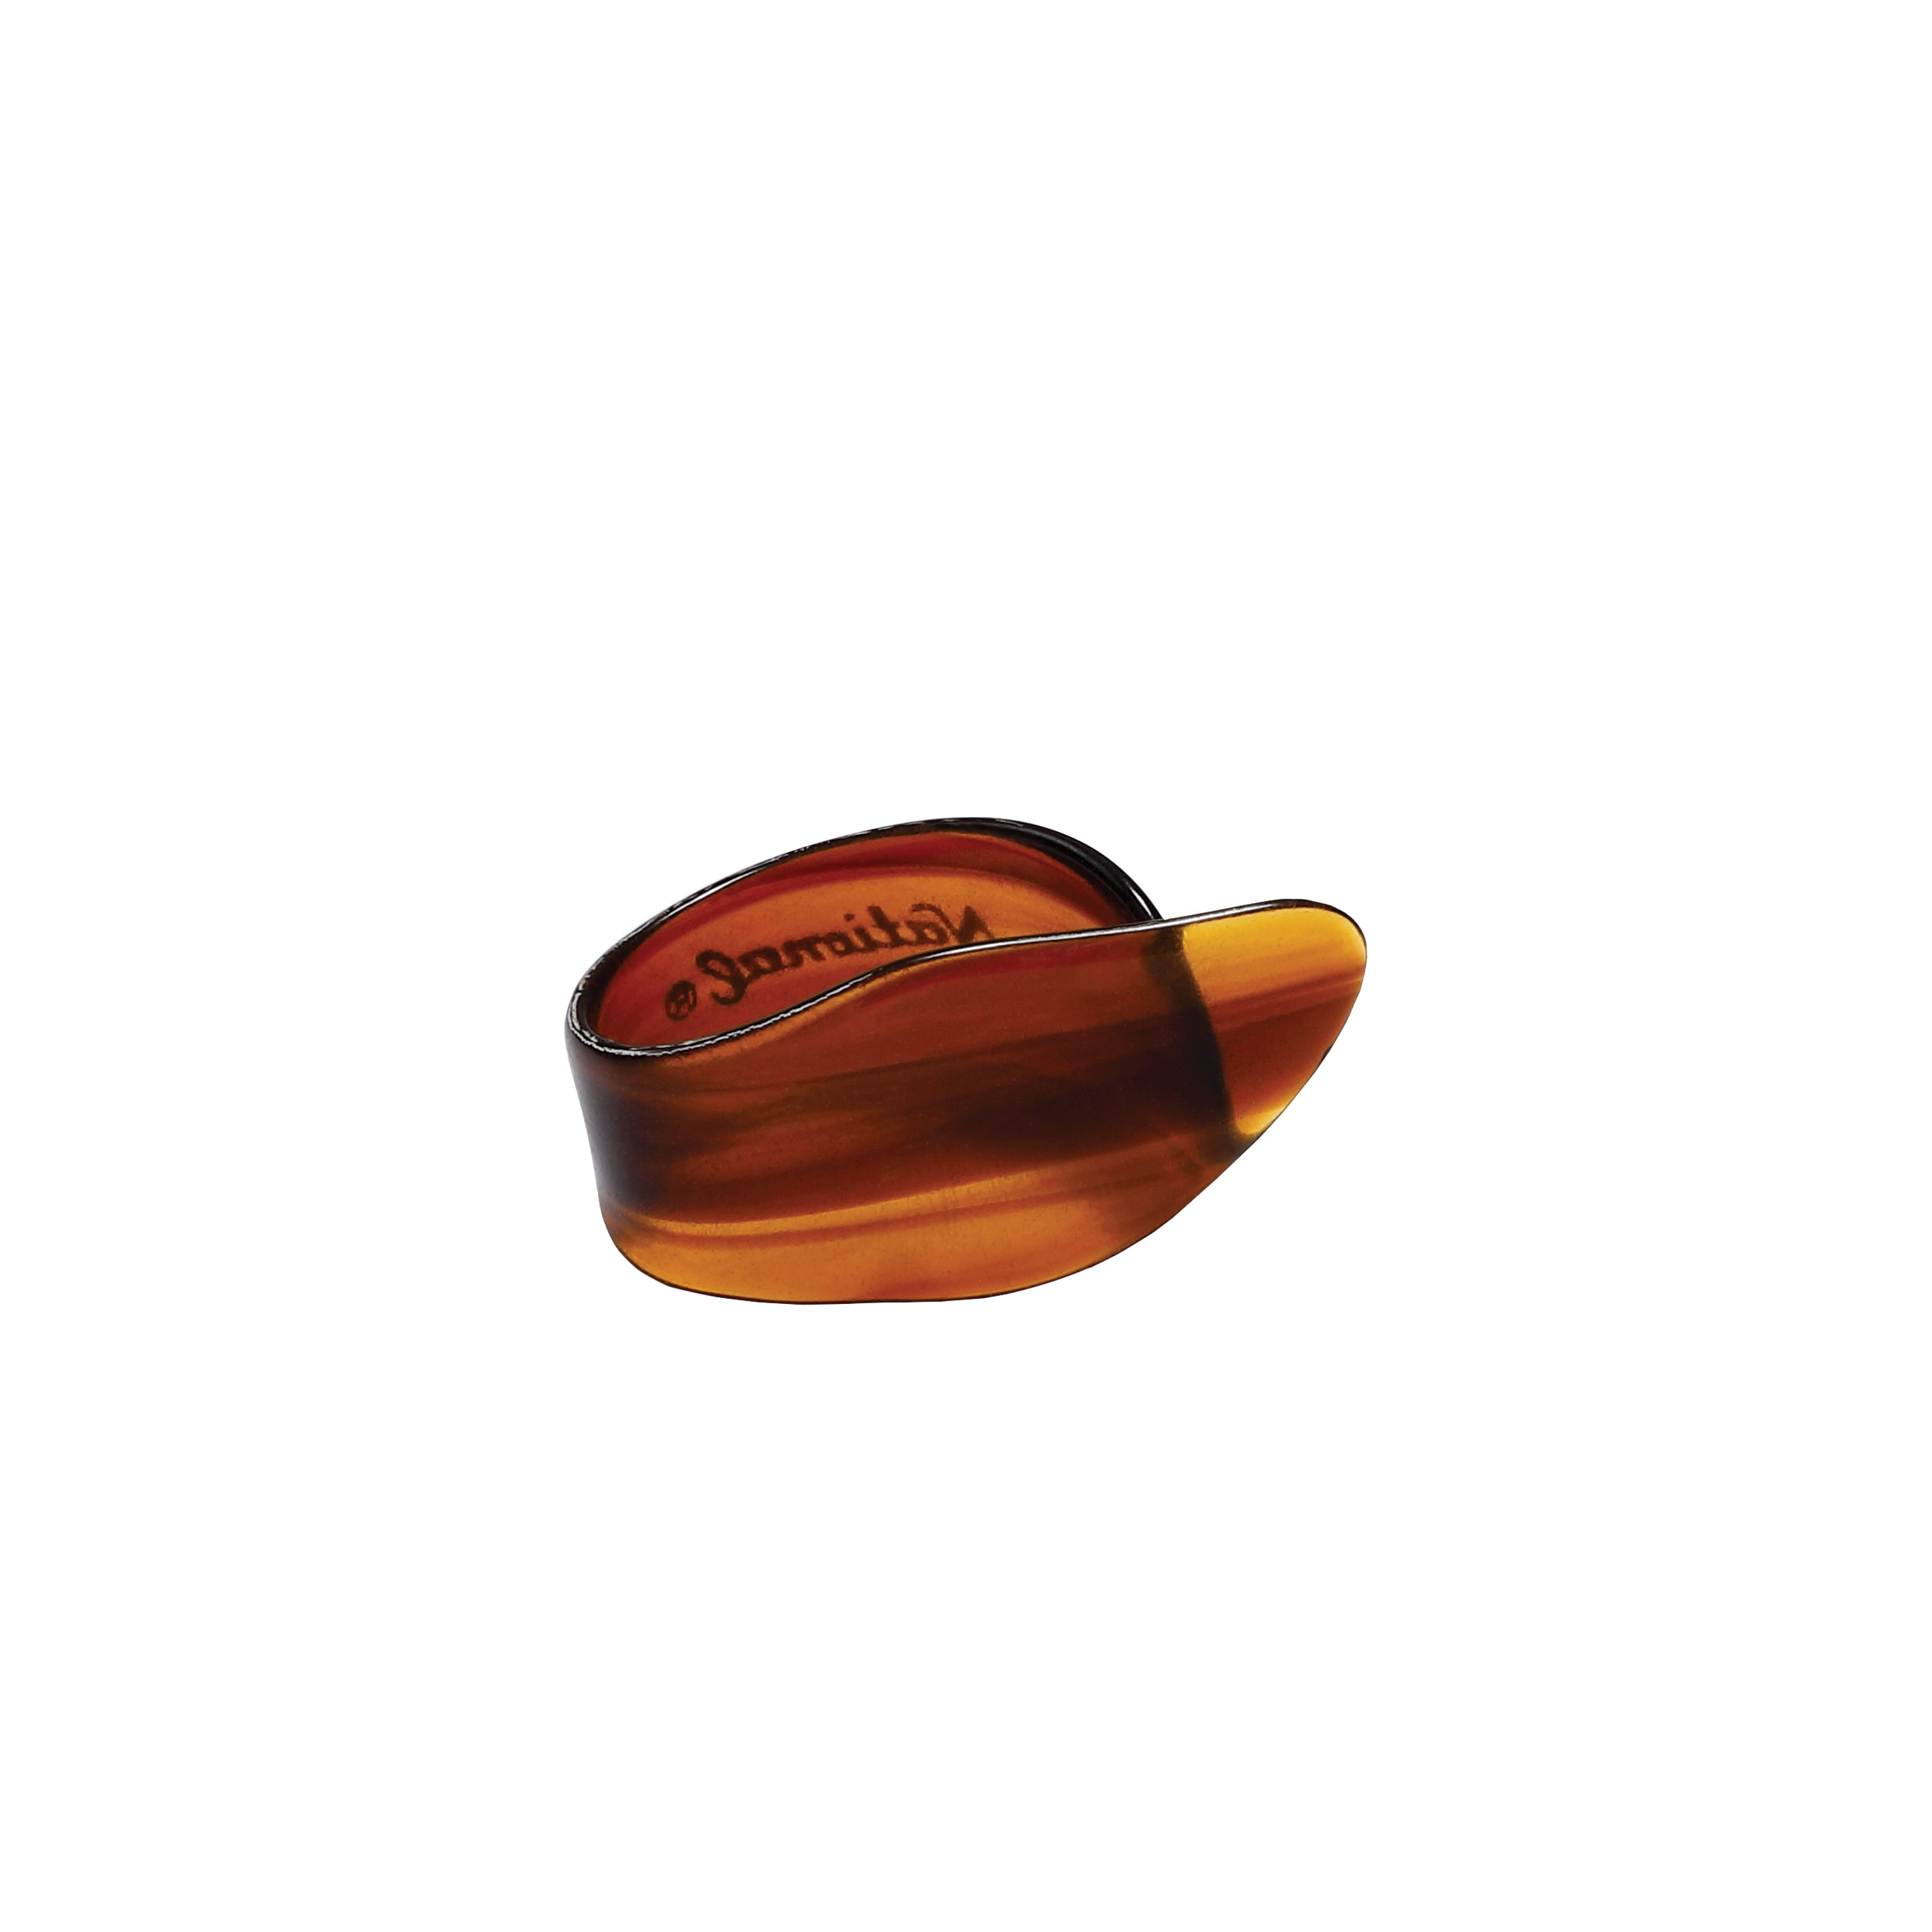 D'Addario NATIONAL Celluloid Large Thumb Picks, Tortoise Shell, 4-Pack